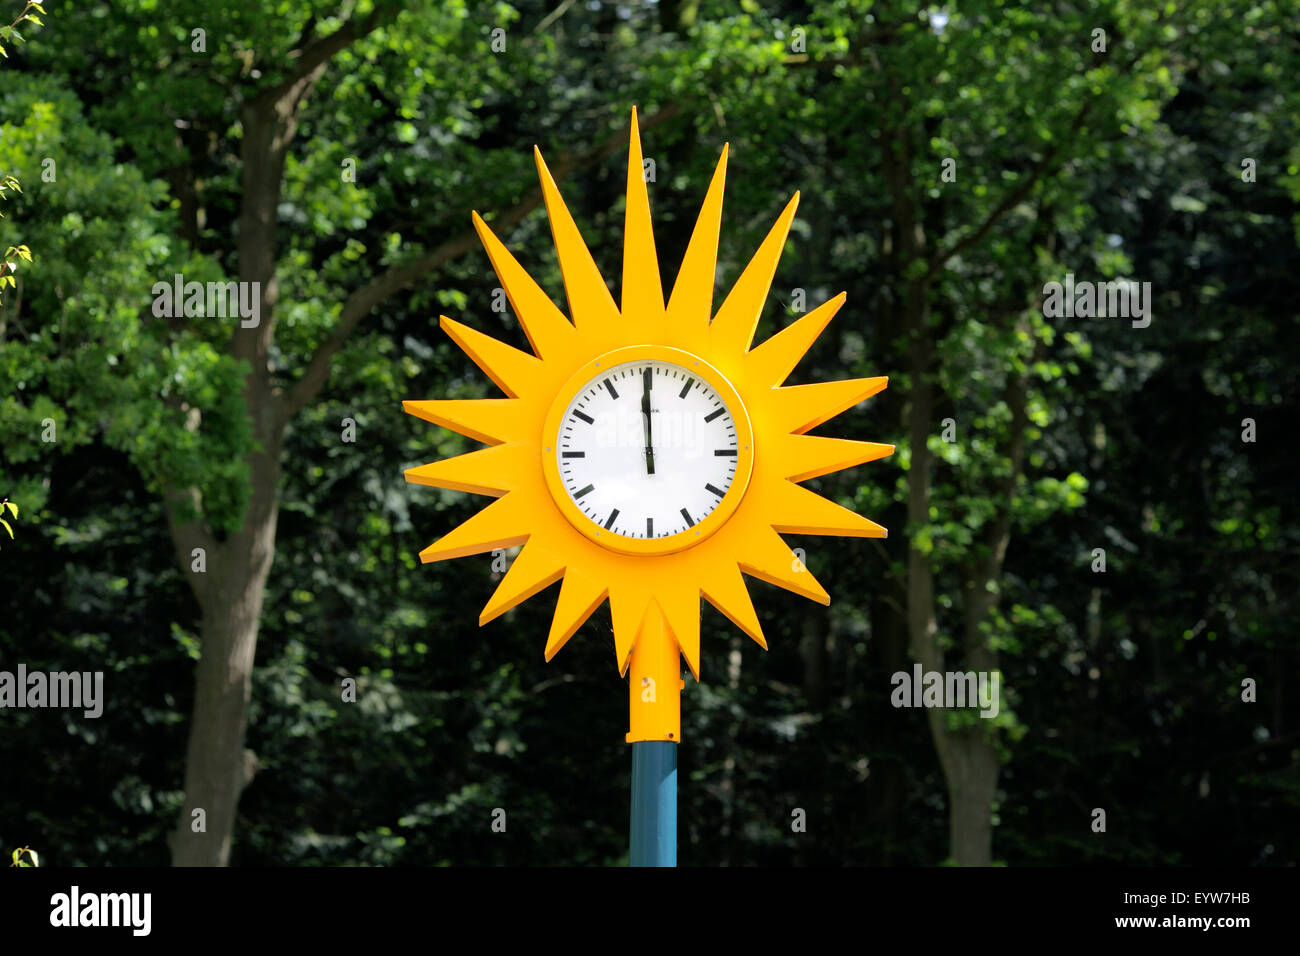 Clock designed to look like the sun, in the grounds of the Zonnestraal heliotherapy sanatorium, Hilversum, The Netherlands. Stock Photo